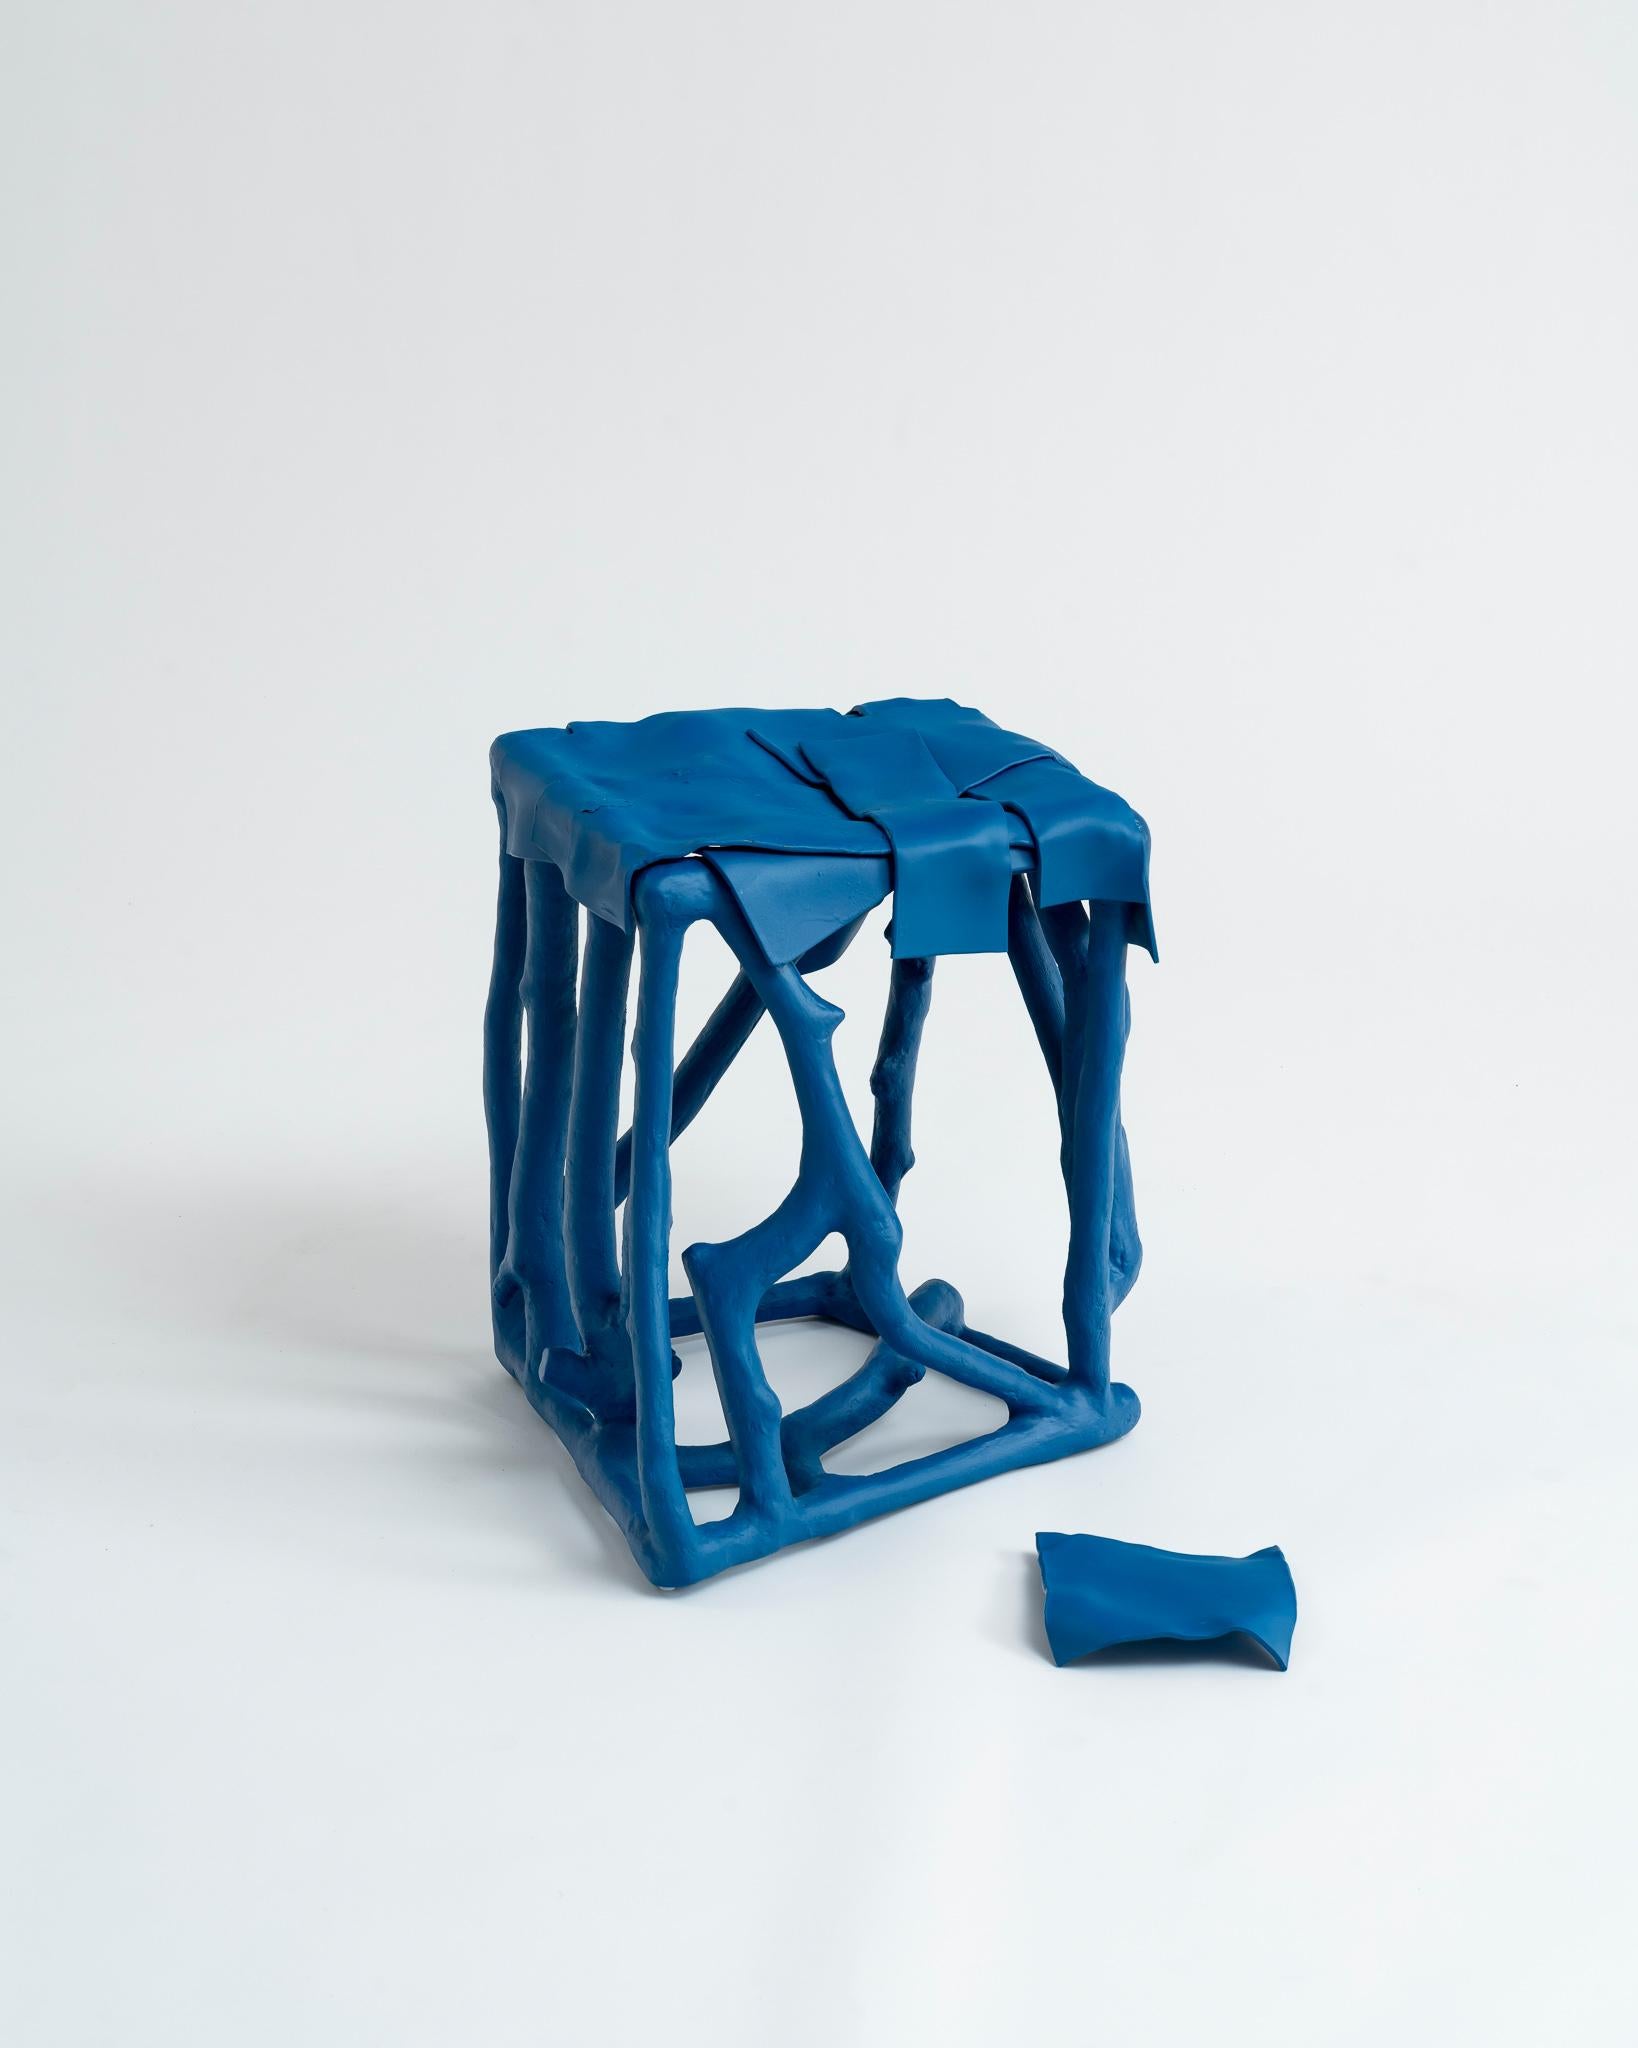 This eclectic, one-off azure-blue decorative accent table or stool is made by French multidisciplinary artist-designer Louis Bressolles. The entirely unique sculptural object is constructed of interlocking pieces of reclaimed tree branches and